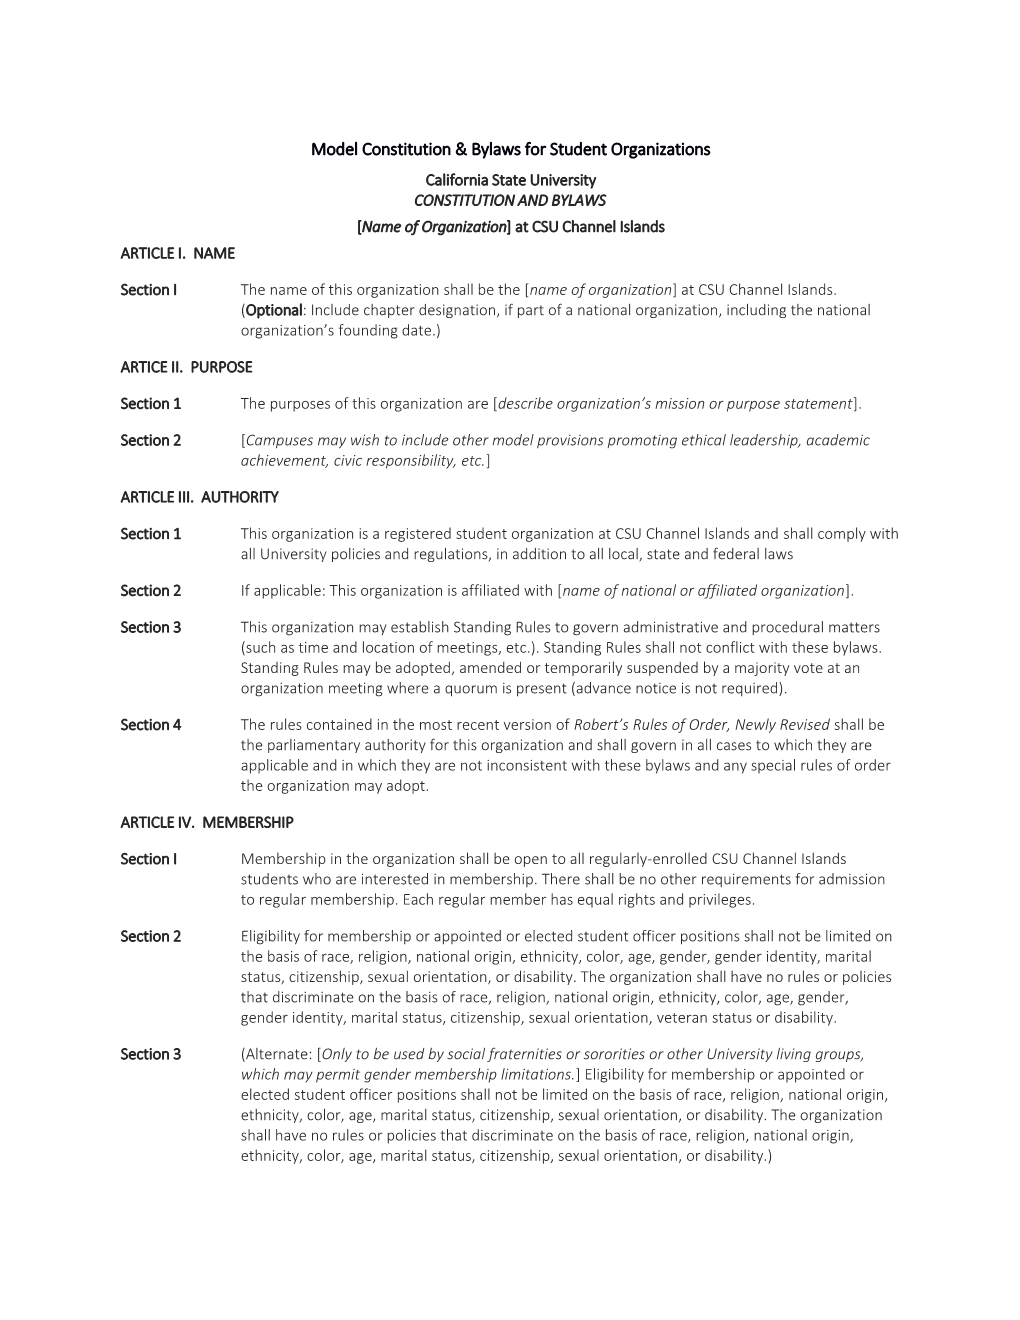 Model Constitution & Bylaws for Student Organizations